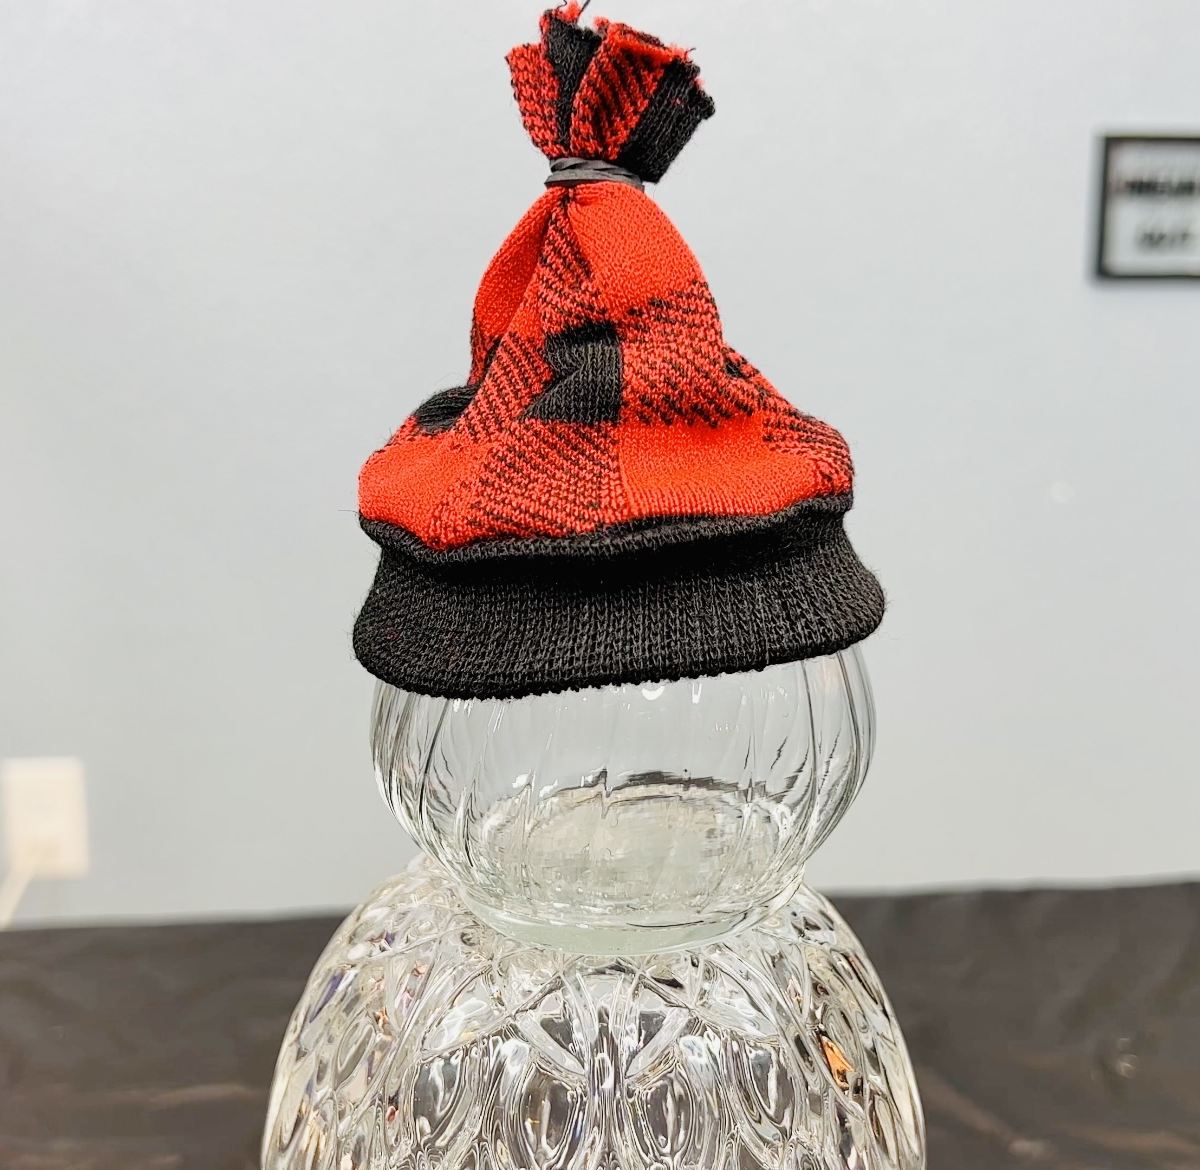 Option 1: Set the glass piece on top and add your sock "hat" to make it a Snowman.